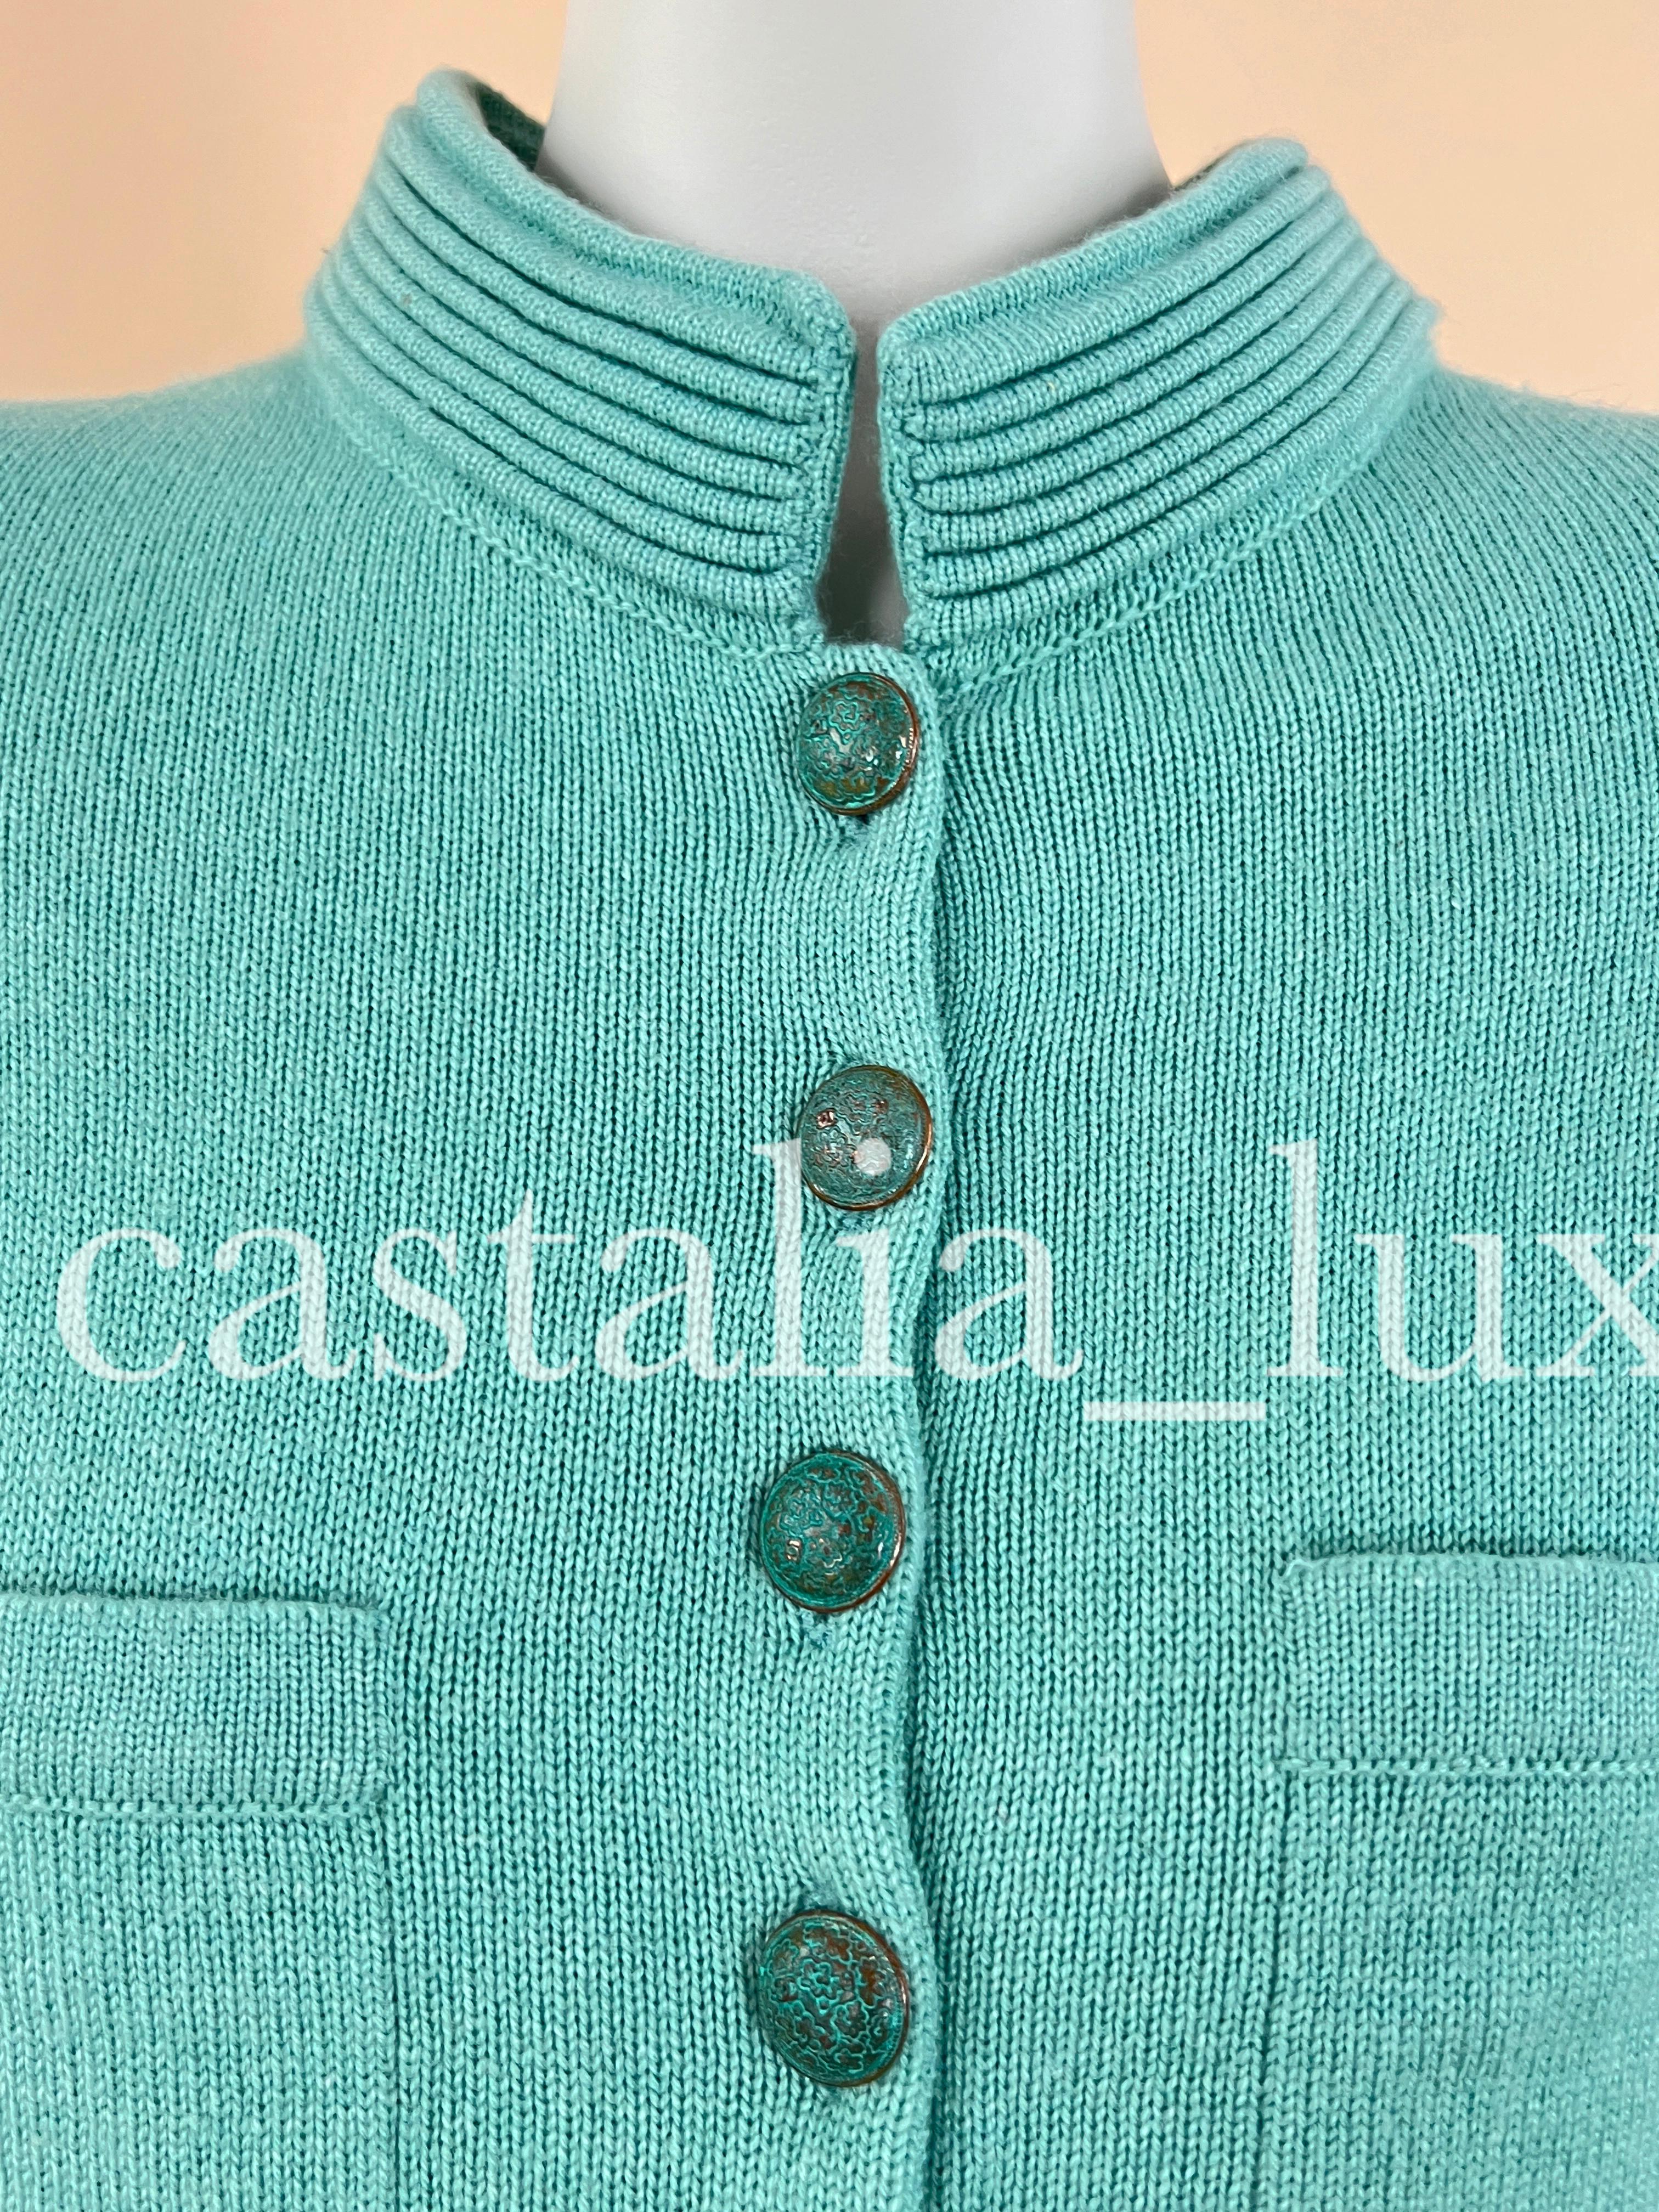 Women's or Men's Chanel New CC Buttons Turquoise Cashmere Jacket For Sale